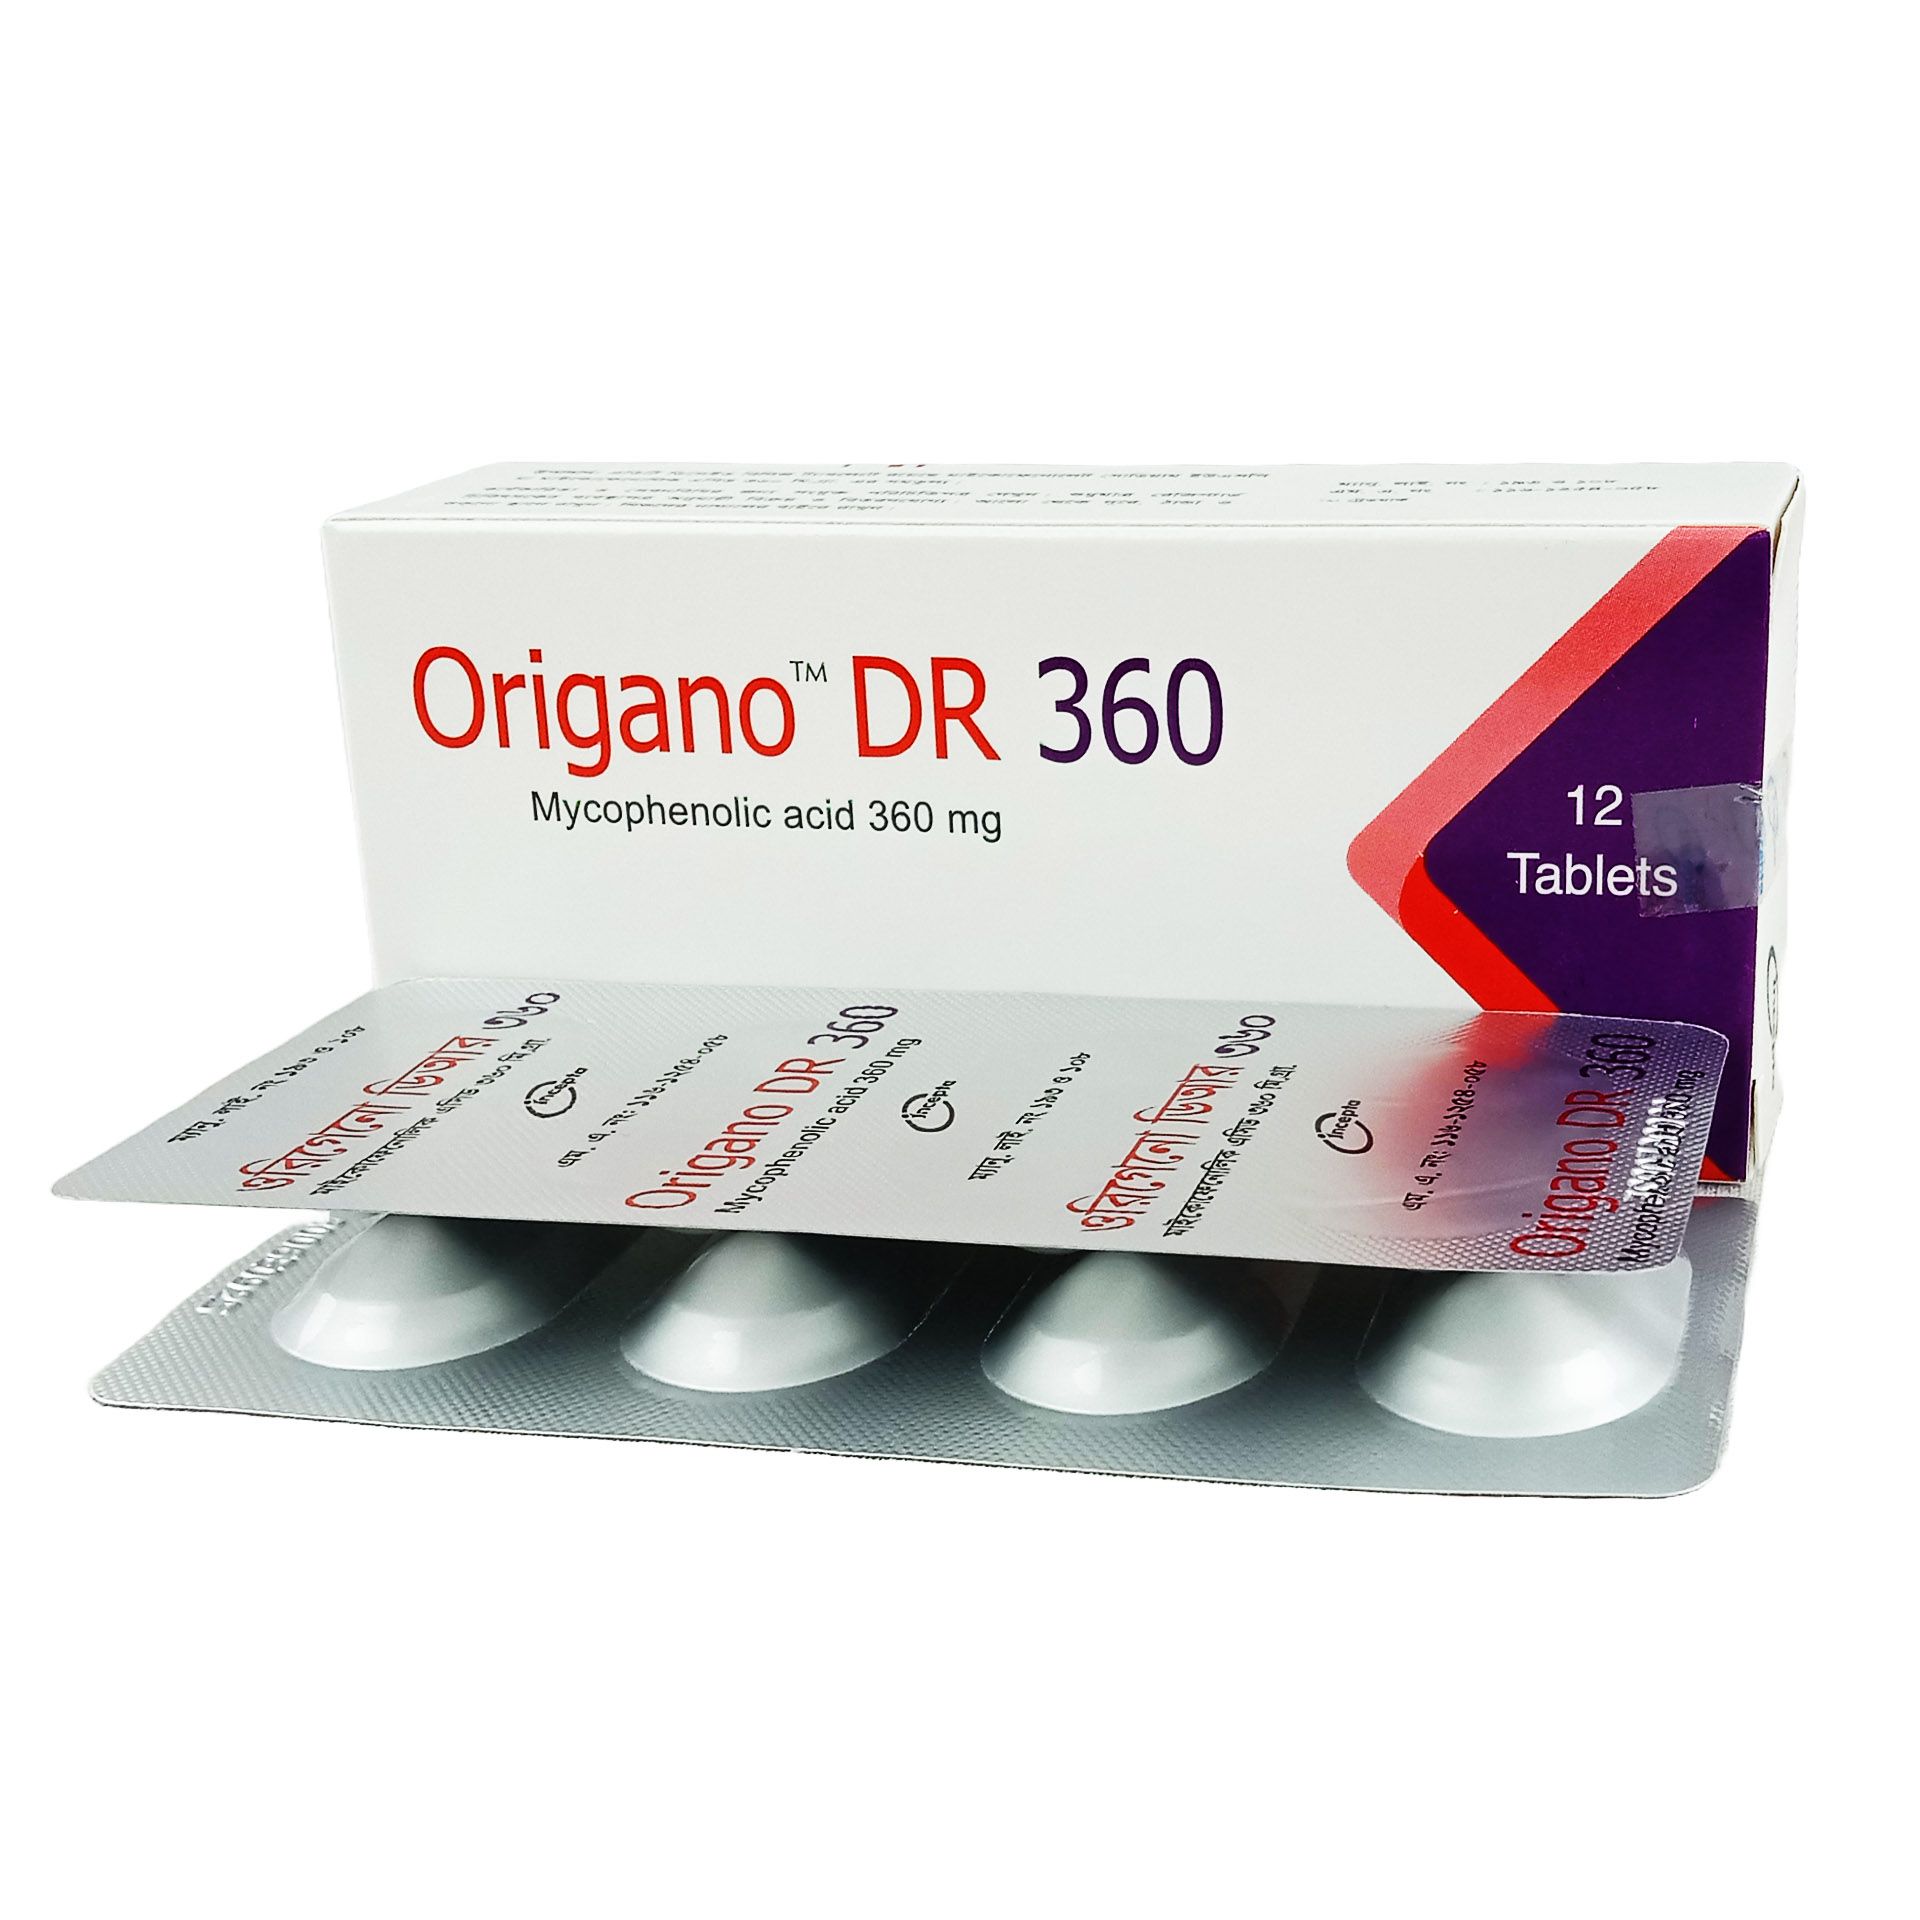 Origano DR 360mg Tablet